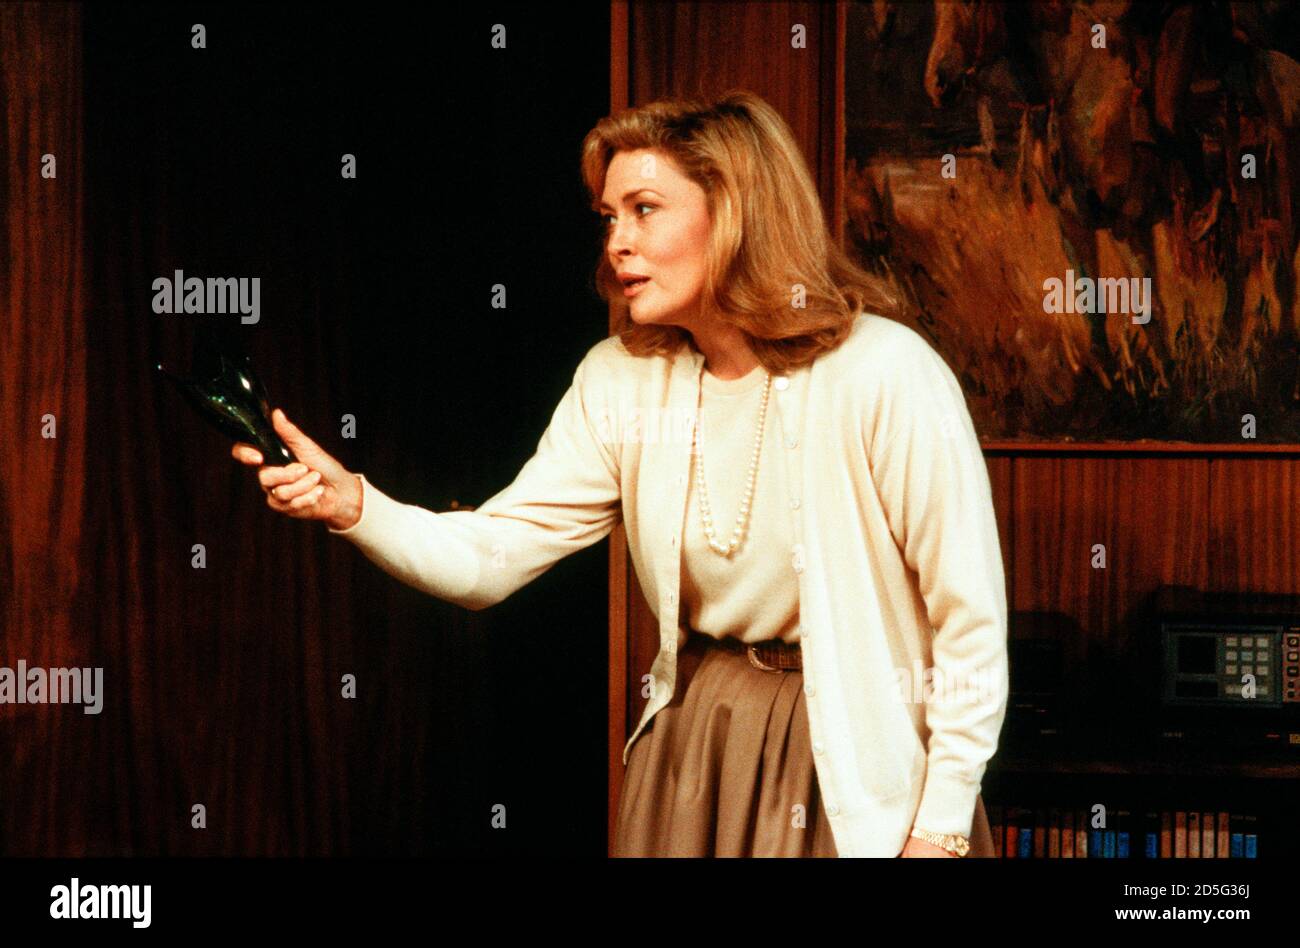 Faye Dunaway (Circe) in CIRCE & BRAVO by Donald Freed at the Hampstead Theatre, London NW3  05/06/1986  set design: Eileen Diss  costumes: Jane Robinson  lighting: Mick Hughes  fights: Jonathan Howell  director: Harold Pinter         (c) Donald Cooper/Photostage   photos@photostage.co.uk   ref/CT-02 Stock Photo